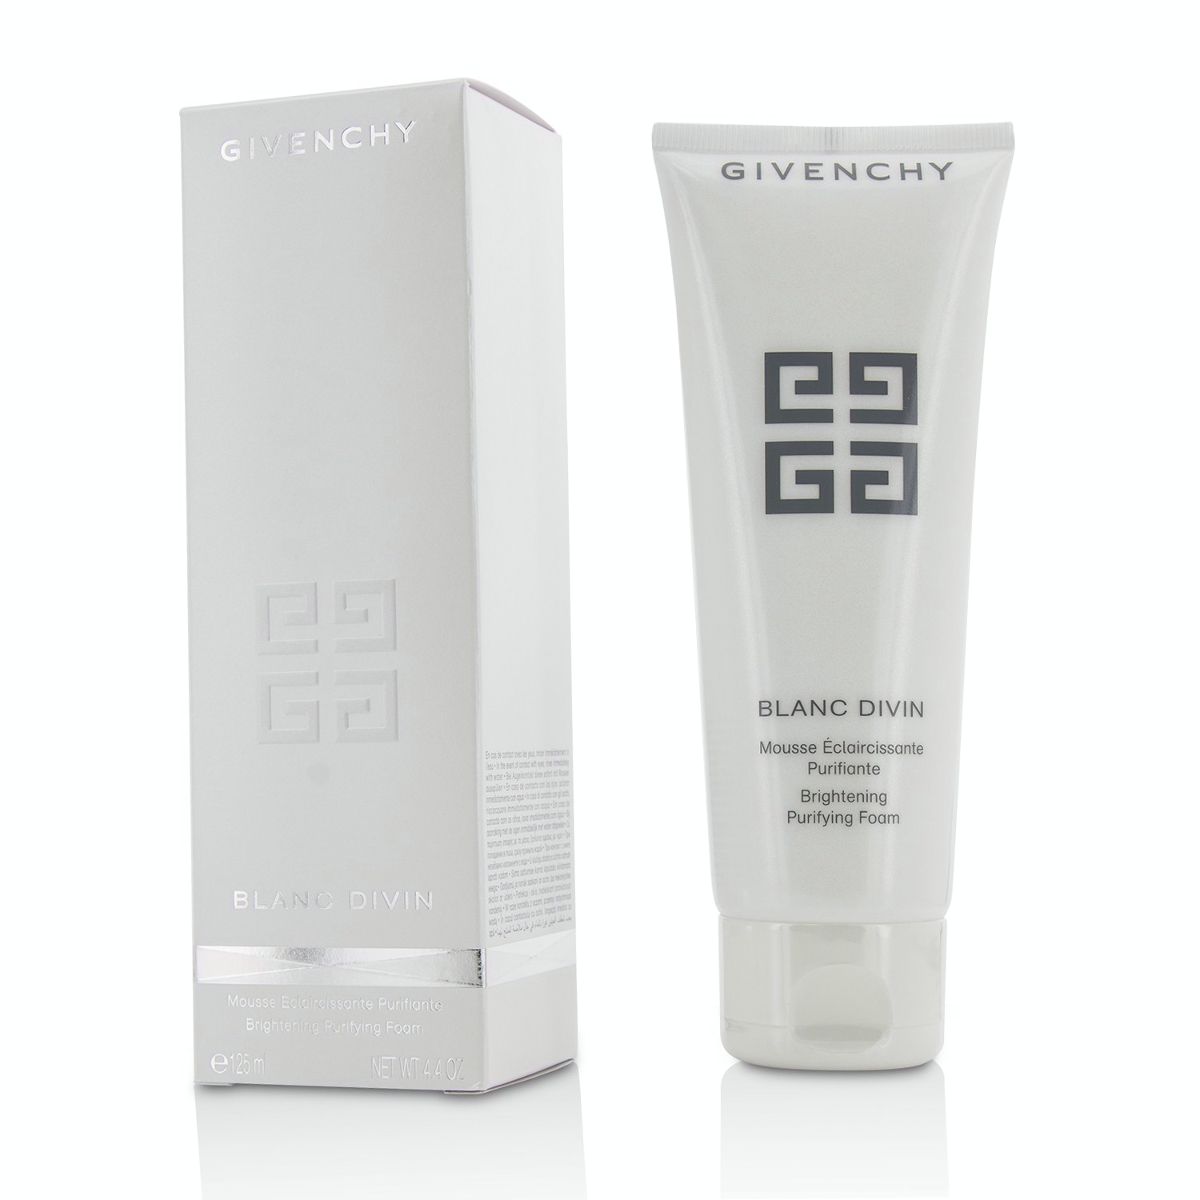 Blanc Divin Brightening Purifying Foam Givenchy Image